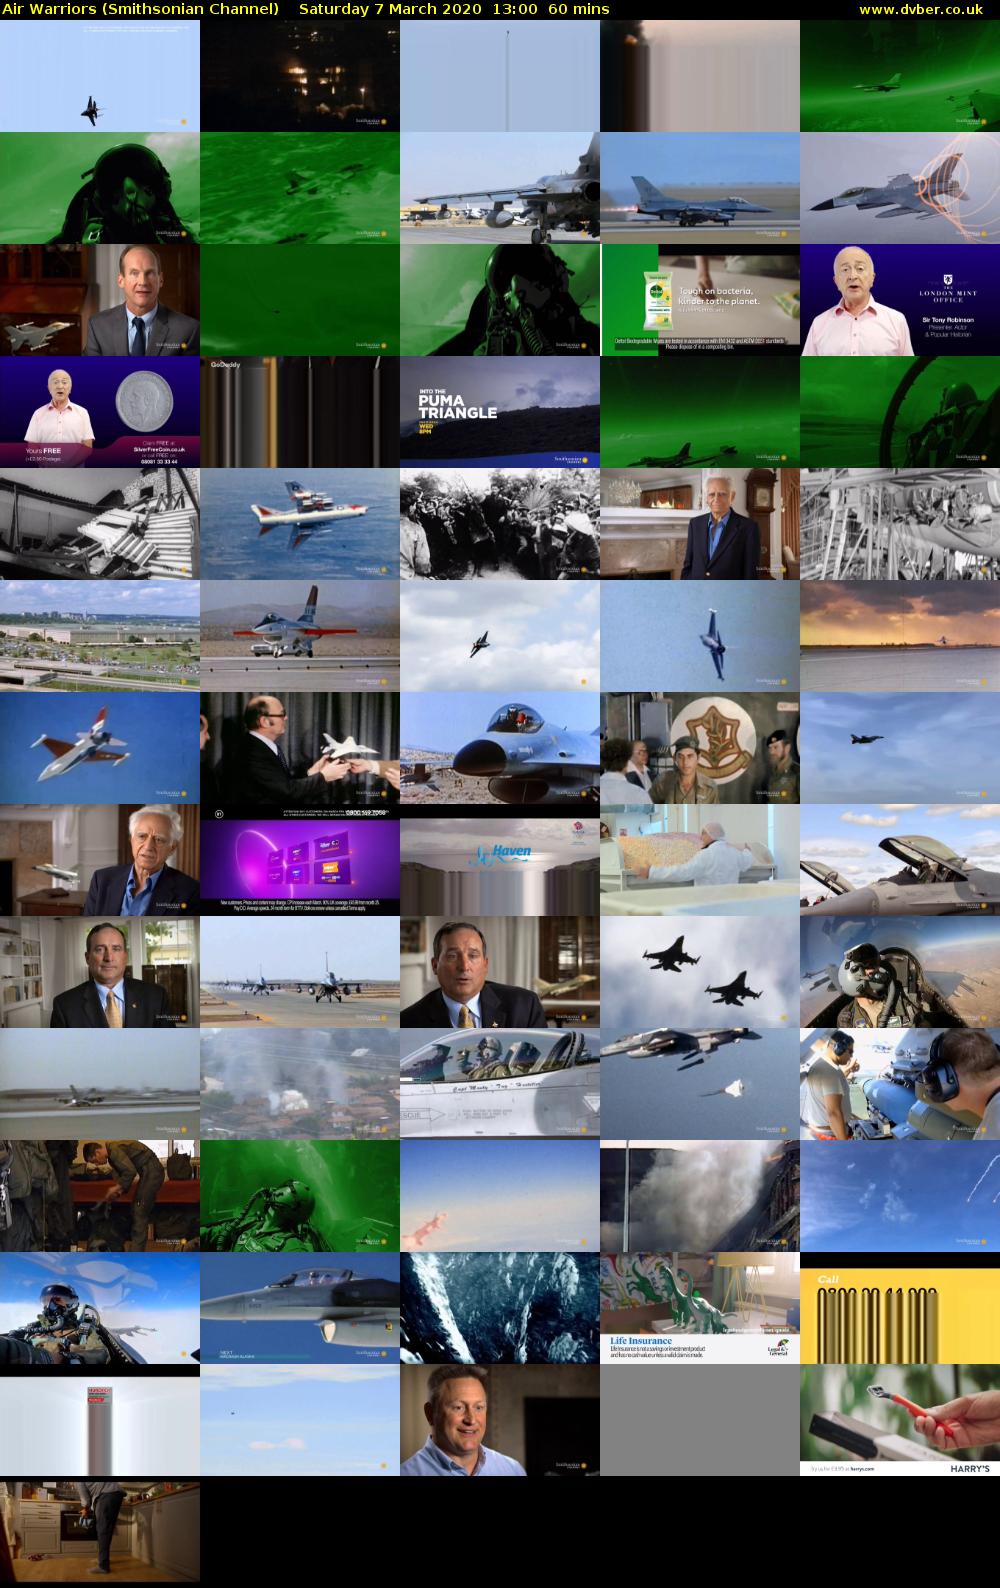 Air Warriors (Smithsonian Channel) Saturday 7 March 2020 13:00 - 14:00